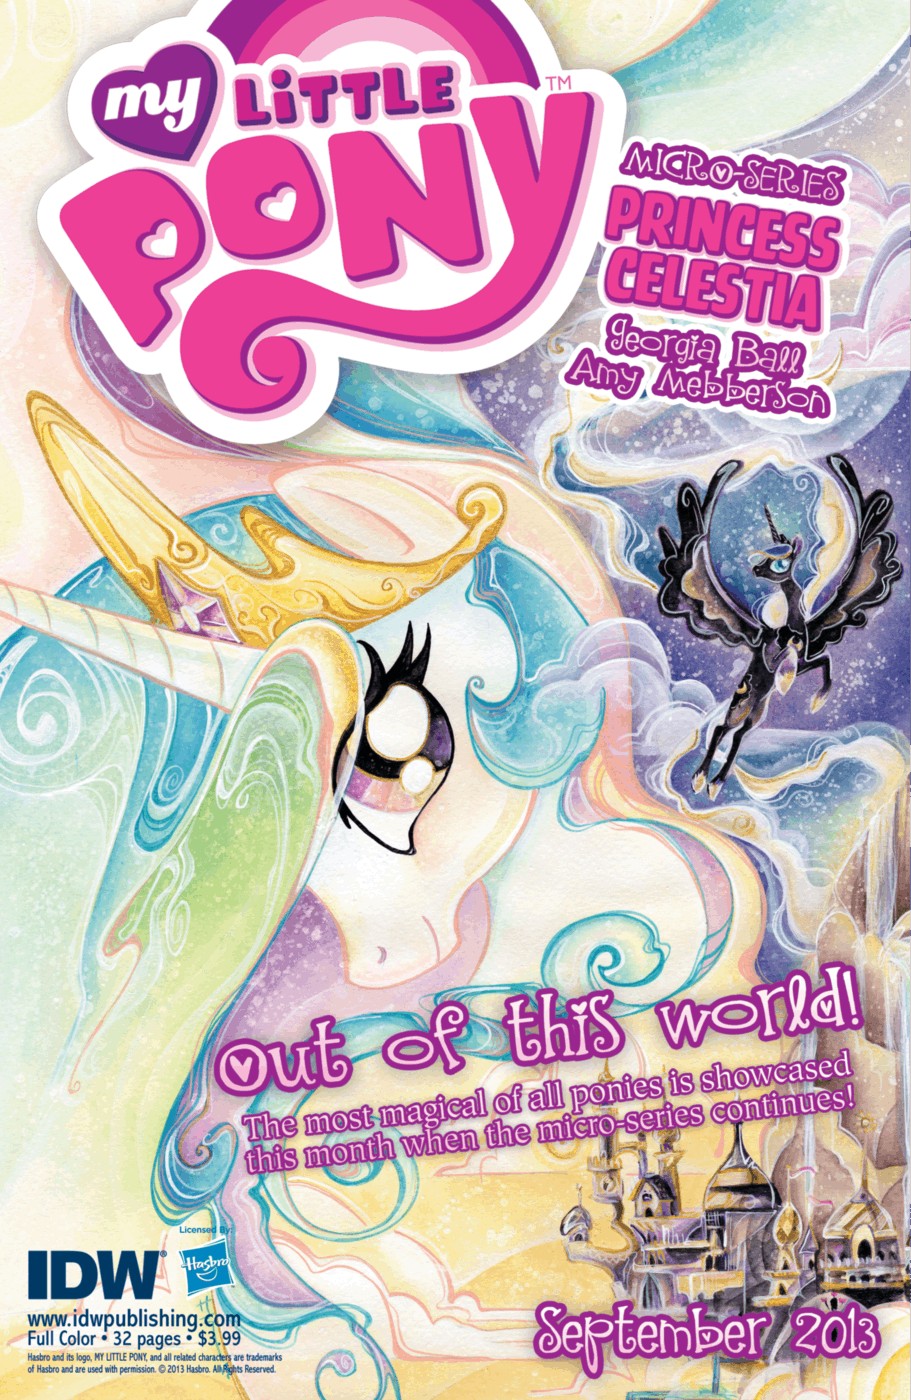 Read online My Little Pony Micro-Series comic -  Issue #7 - 26